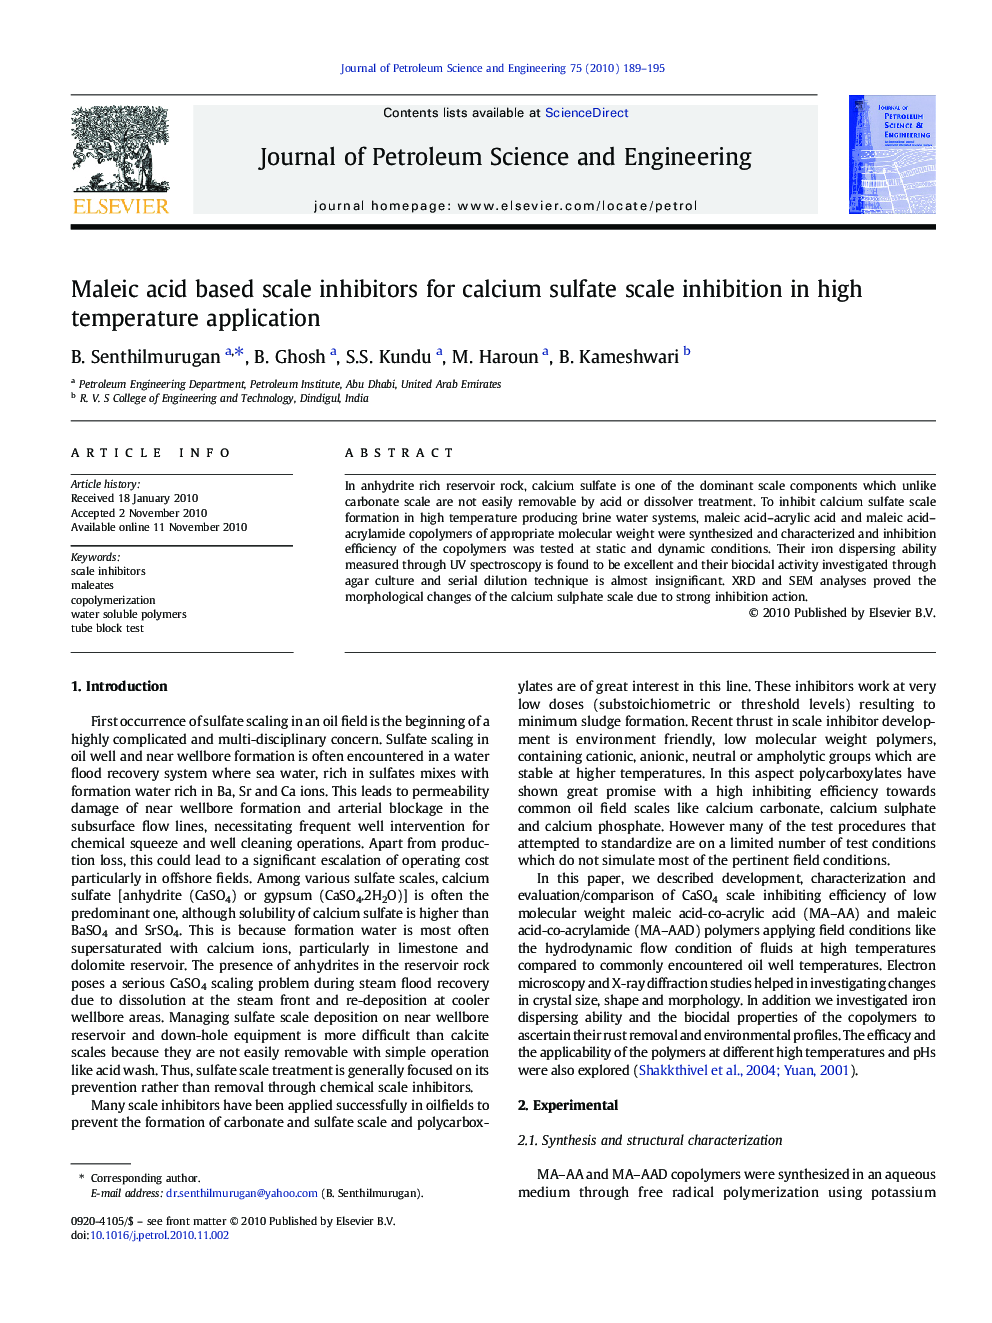 Maleic acid based scale inhibitors for calcium sulfate scale inhibition in high temperature application